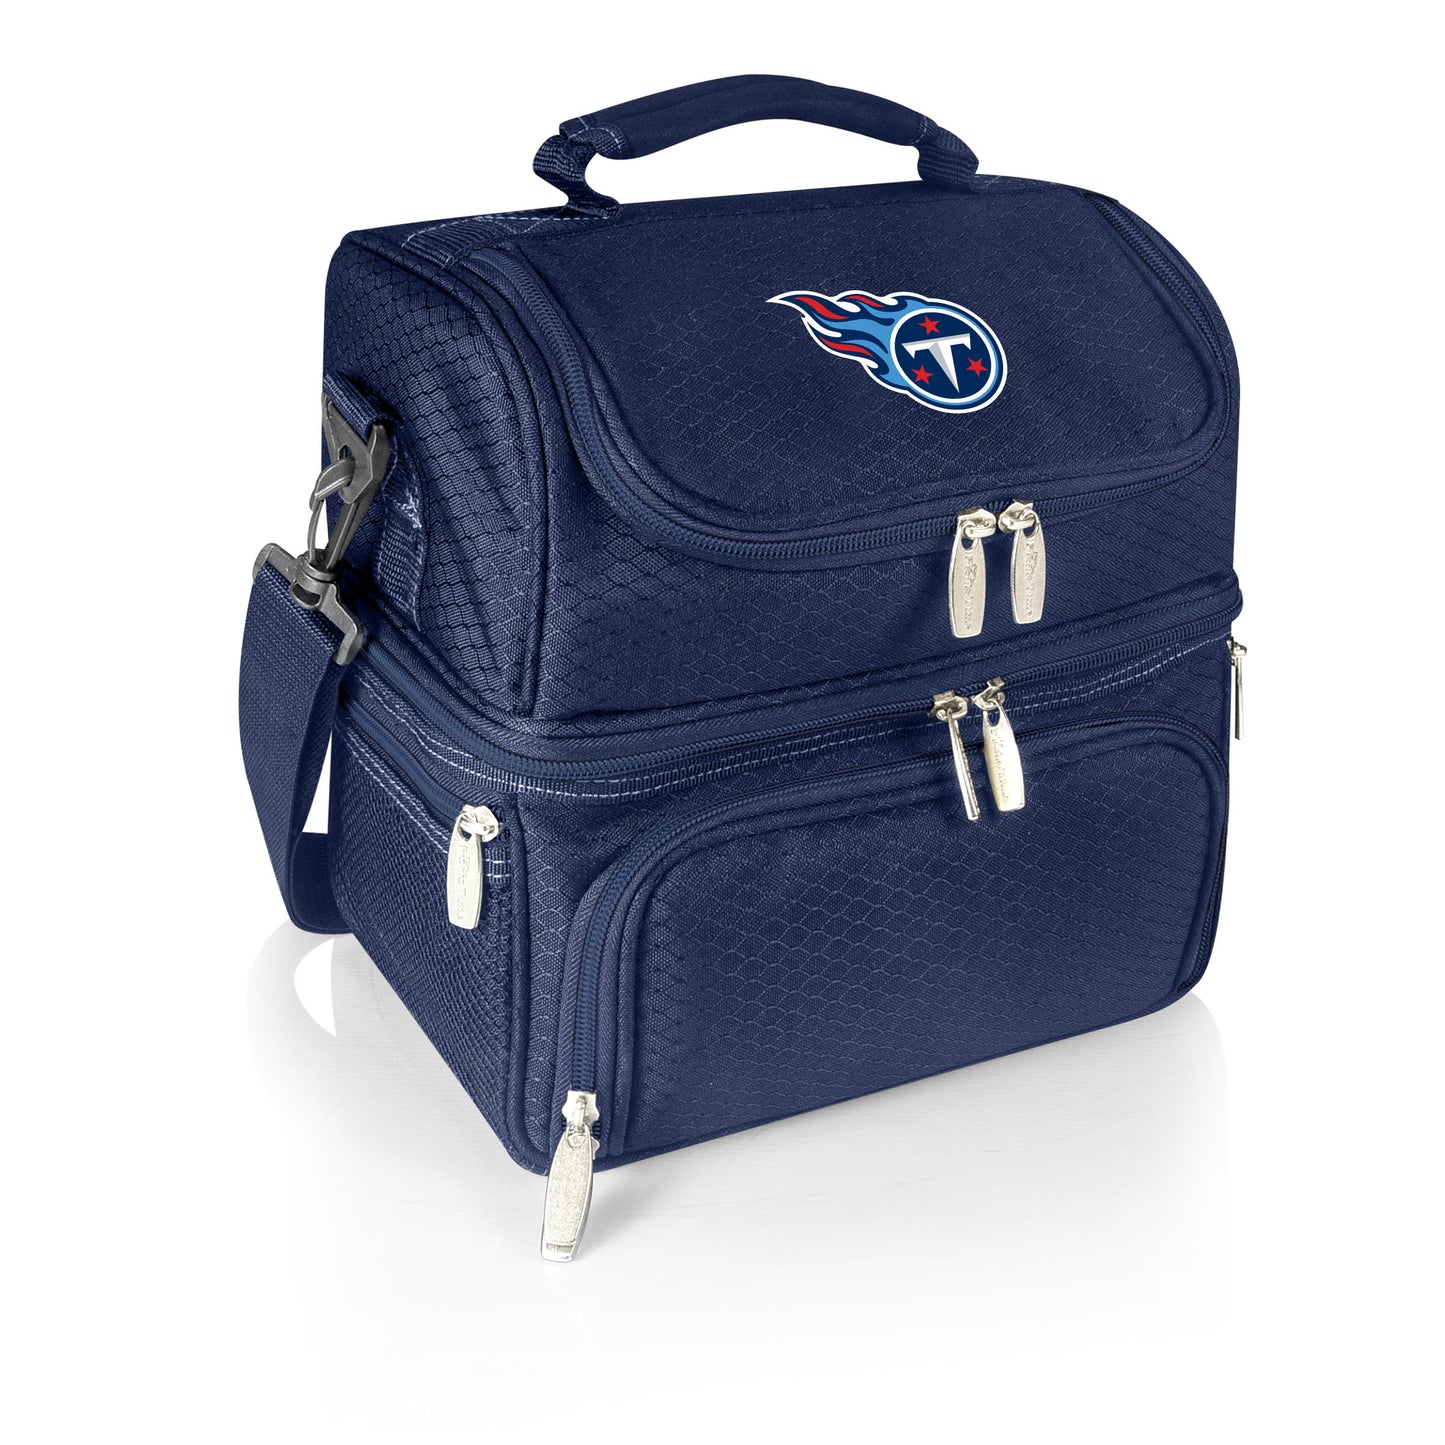 Tennessee Titans - Pranzo Lunch Cooler Bag